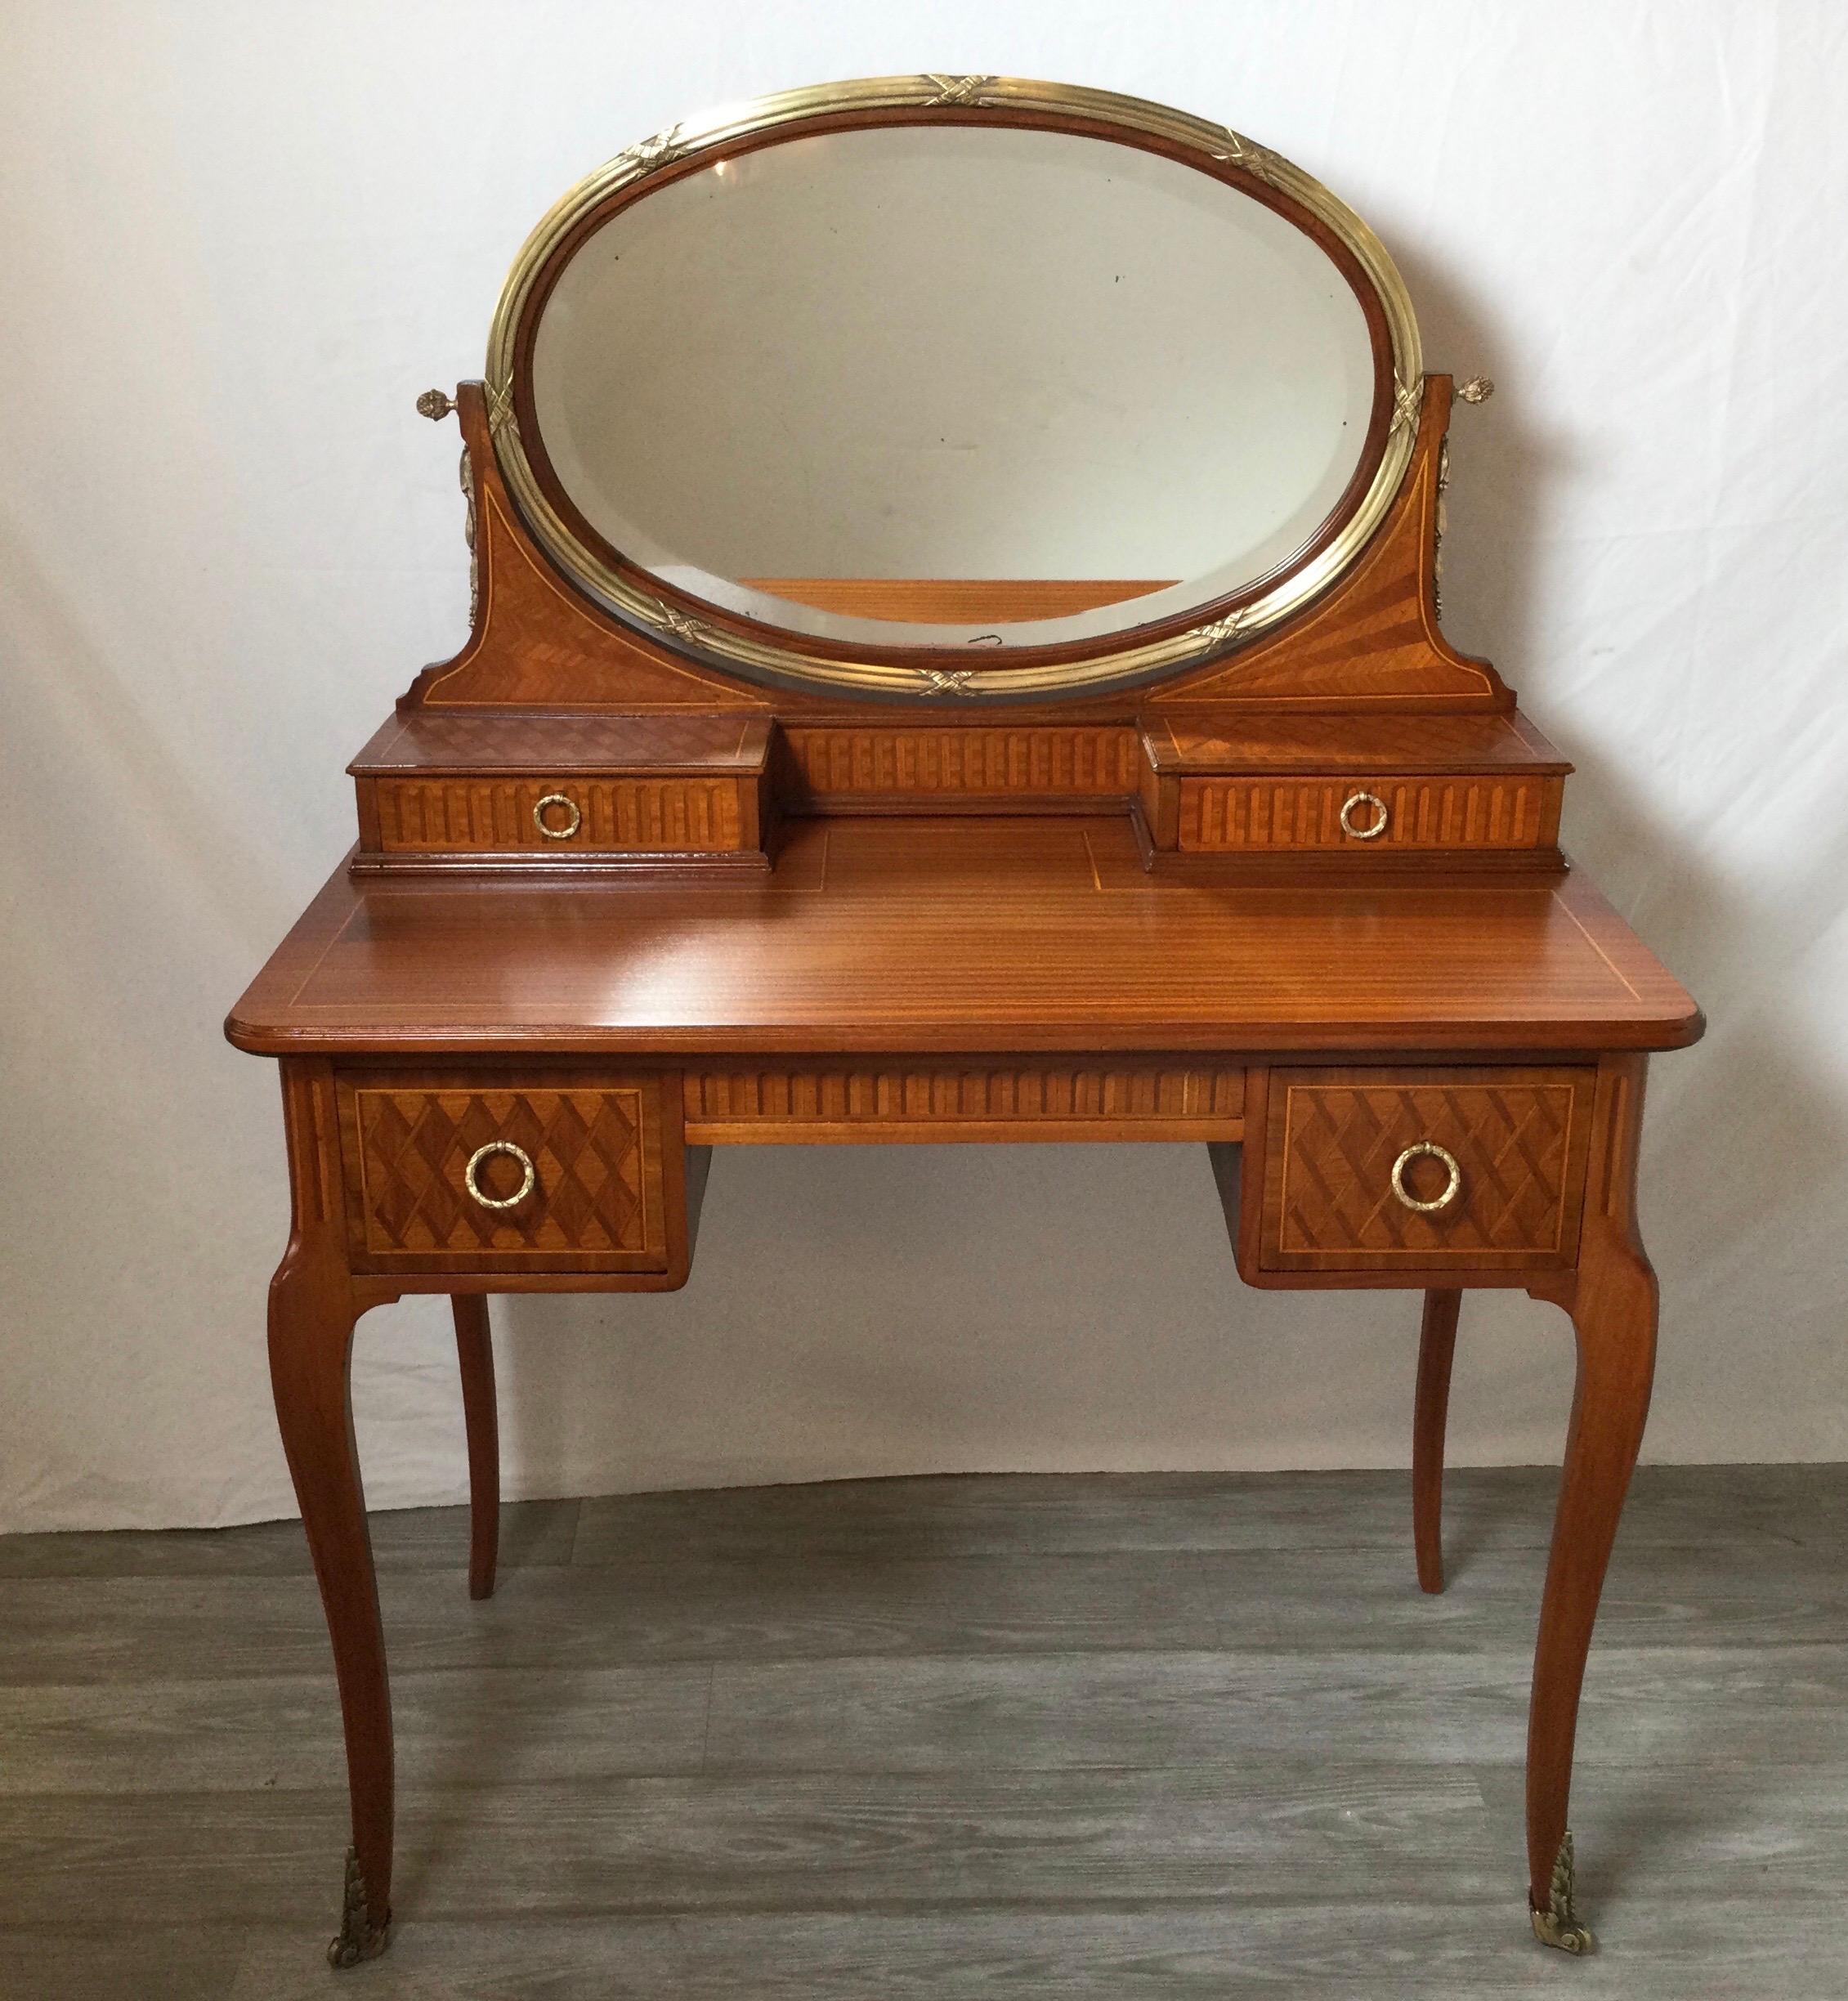 The vanity with oval bronze mount surrounding the beveled mirror with one small drawer on each side above the larger drawers resting on curved cabriole legs. The inlay in a detailed basket weave on the drawers fronts with all-over inlay on the other